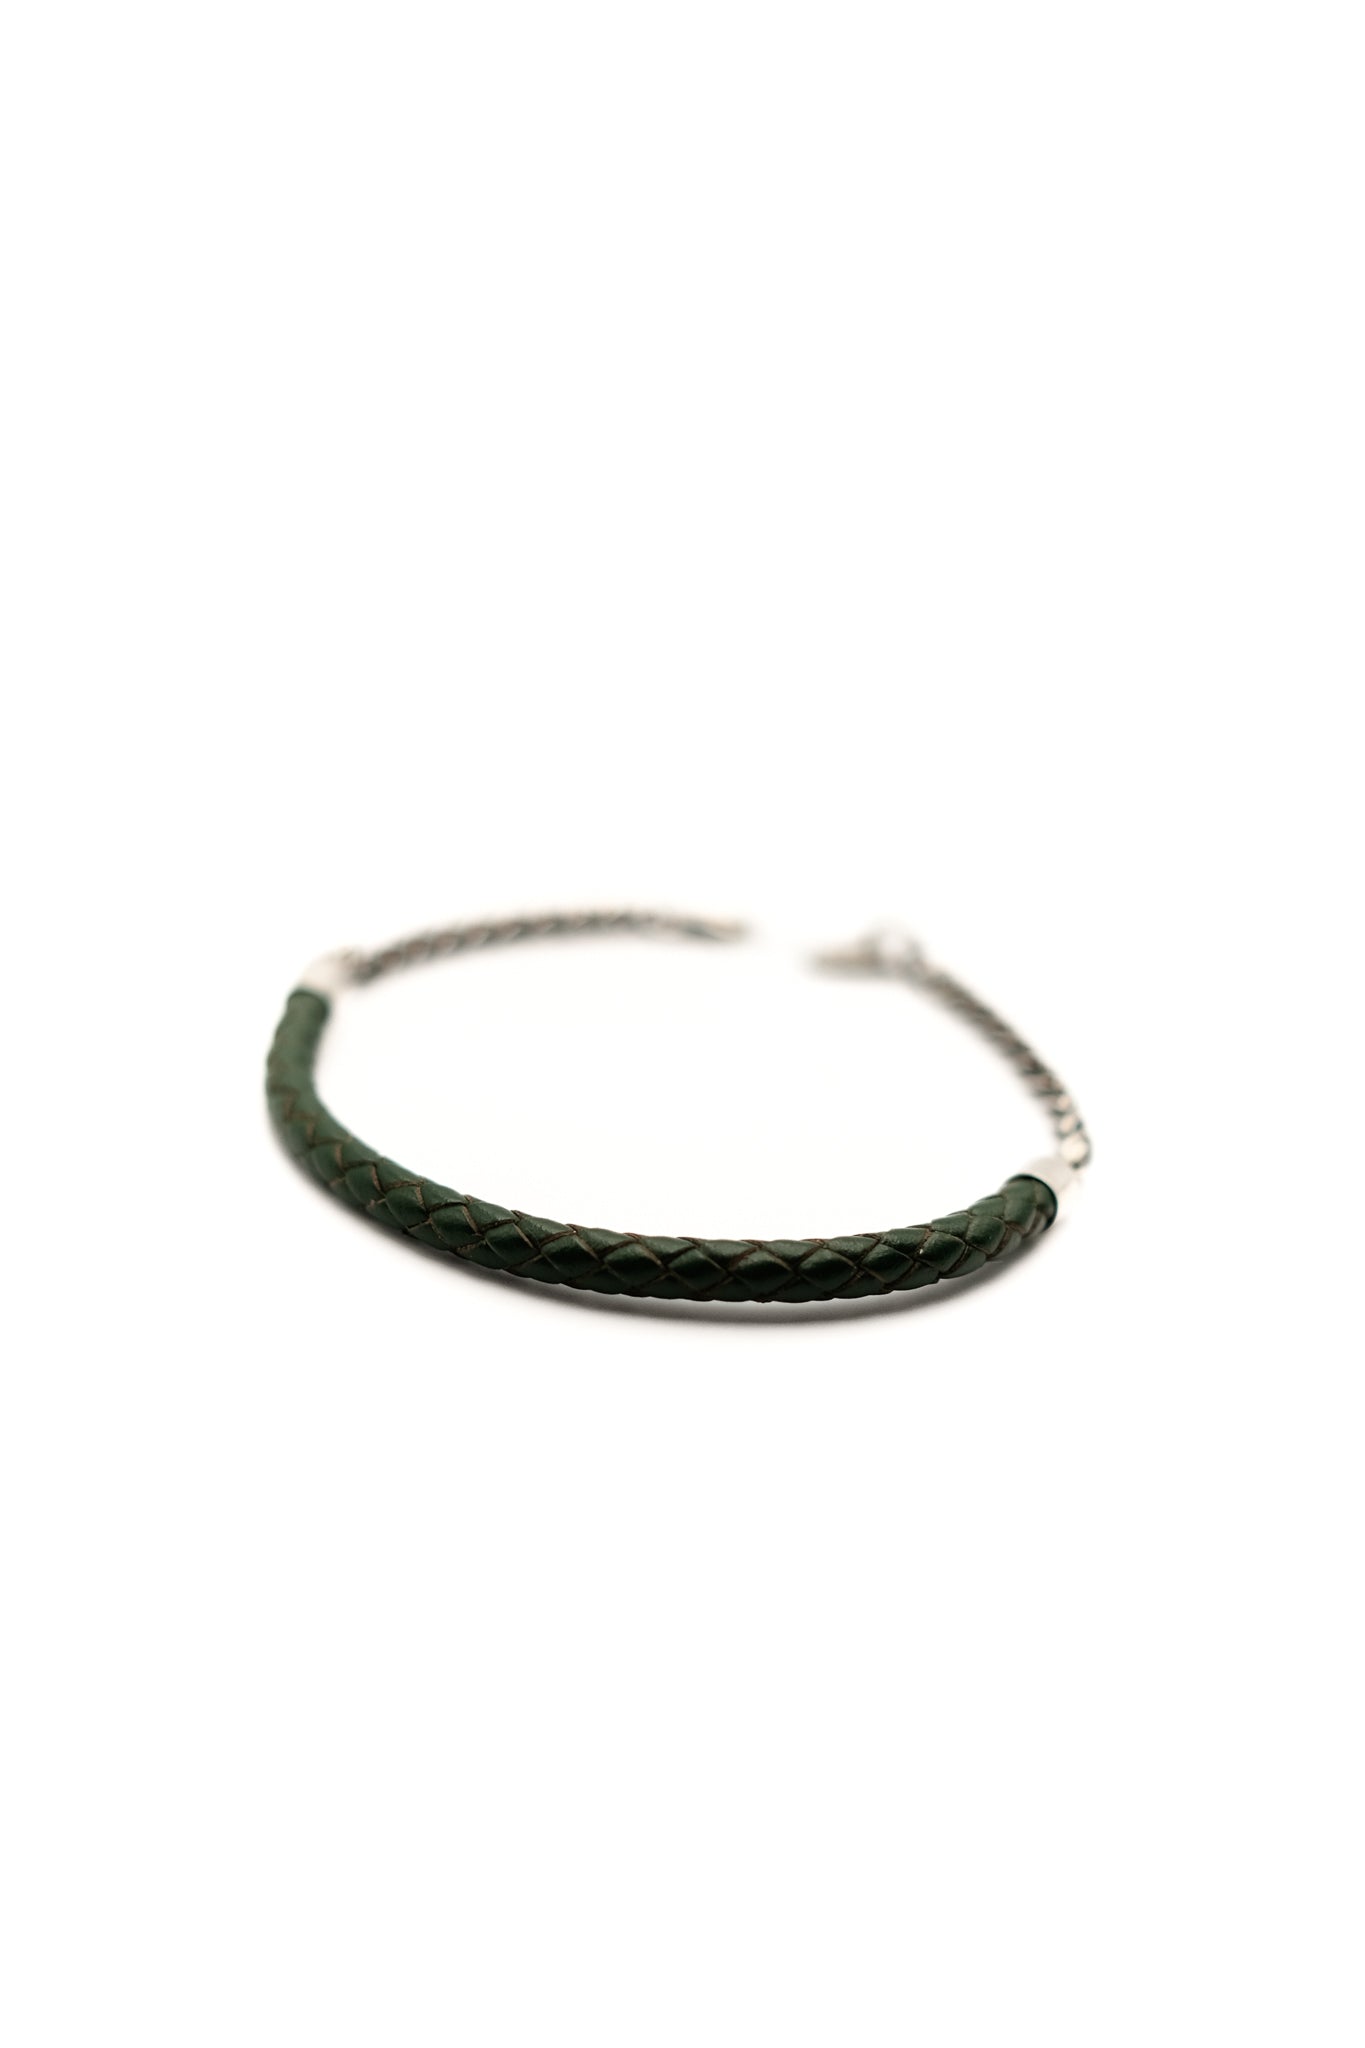 Wanderer Bracelet with Green Leather